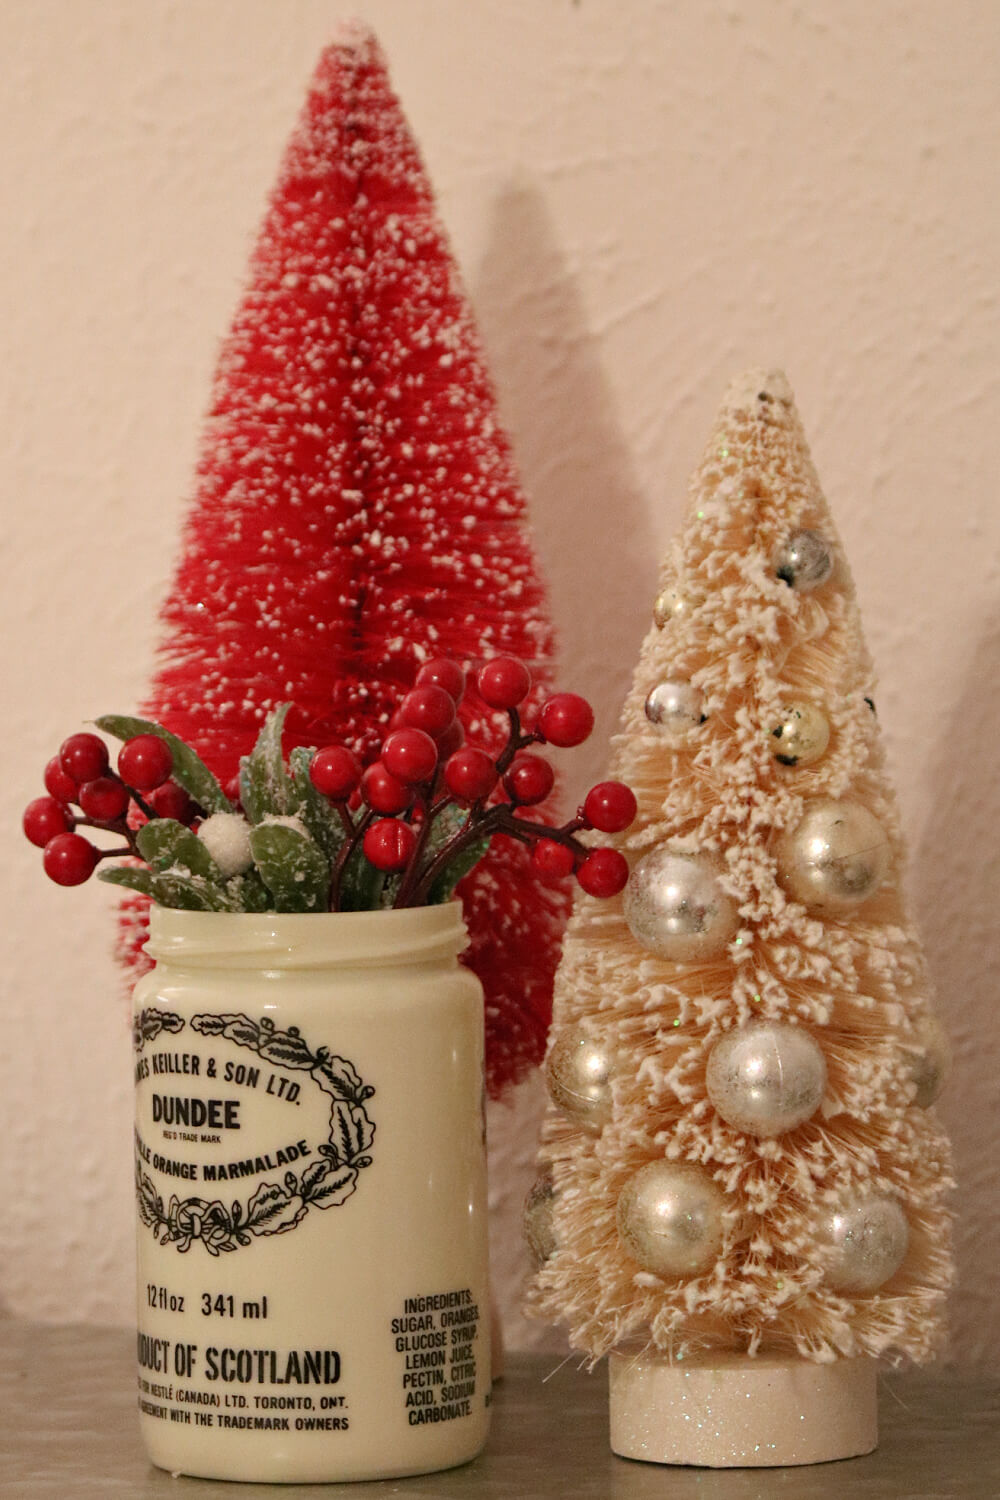 A red and cream tree with a marmalade jar of Christmas picks